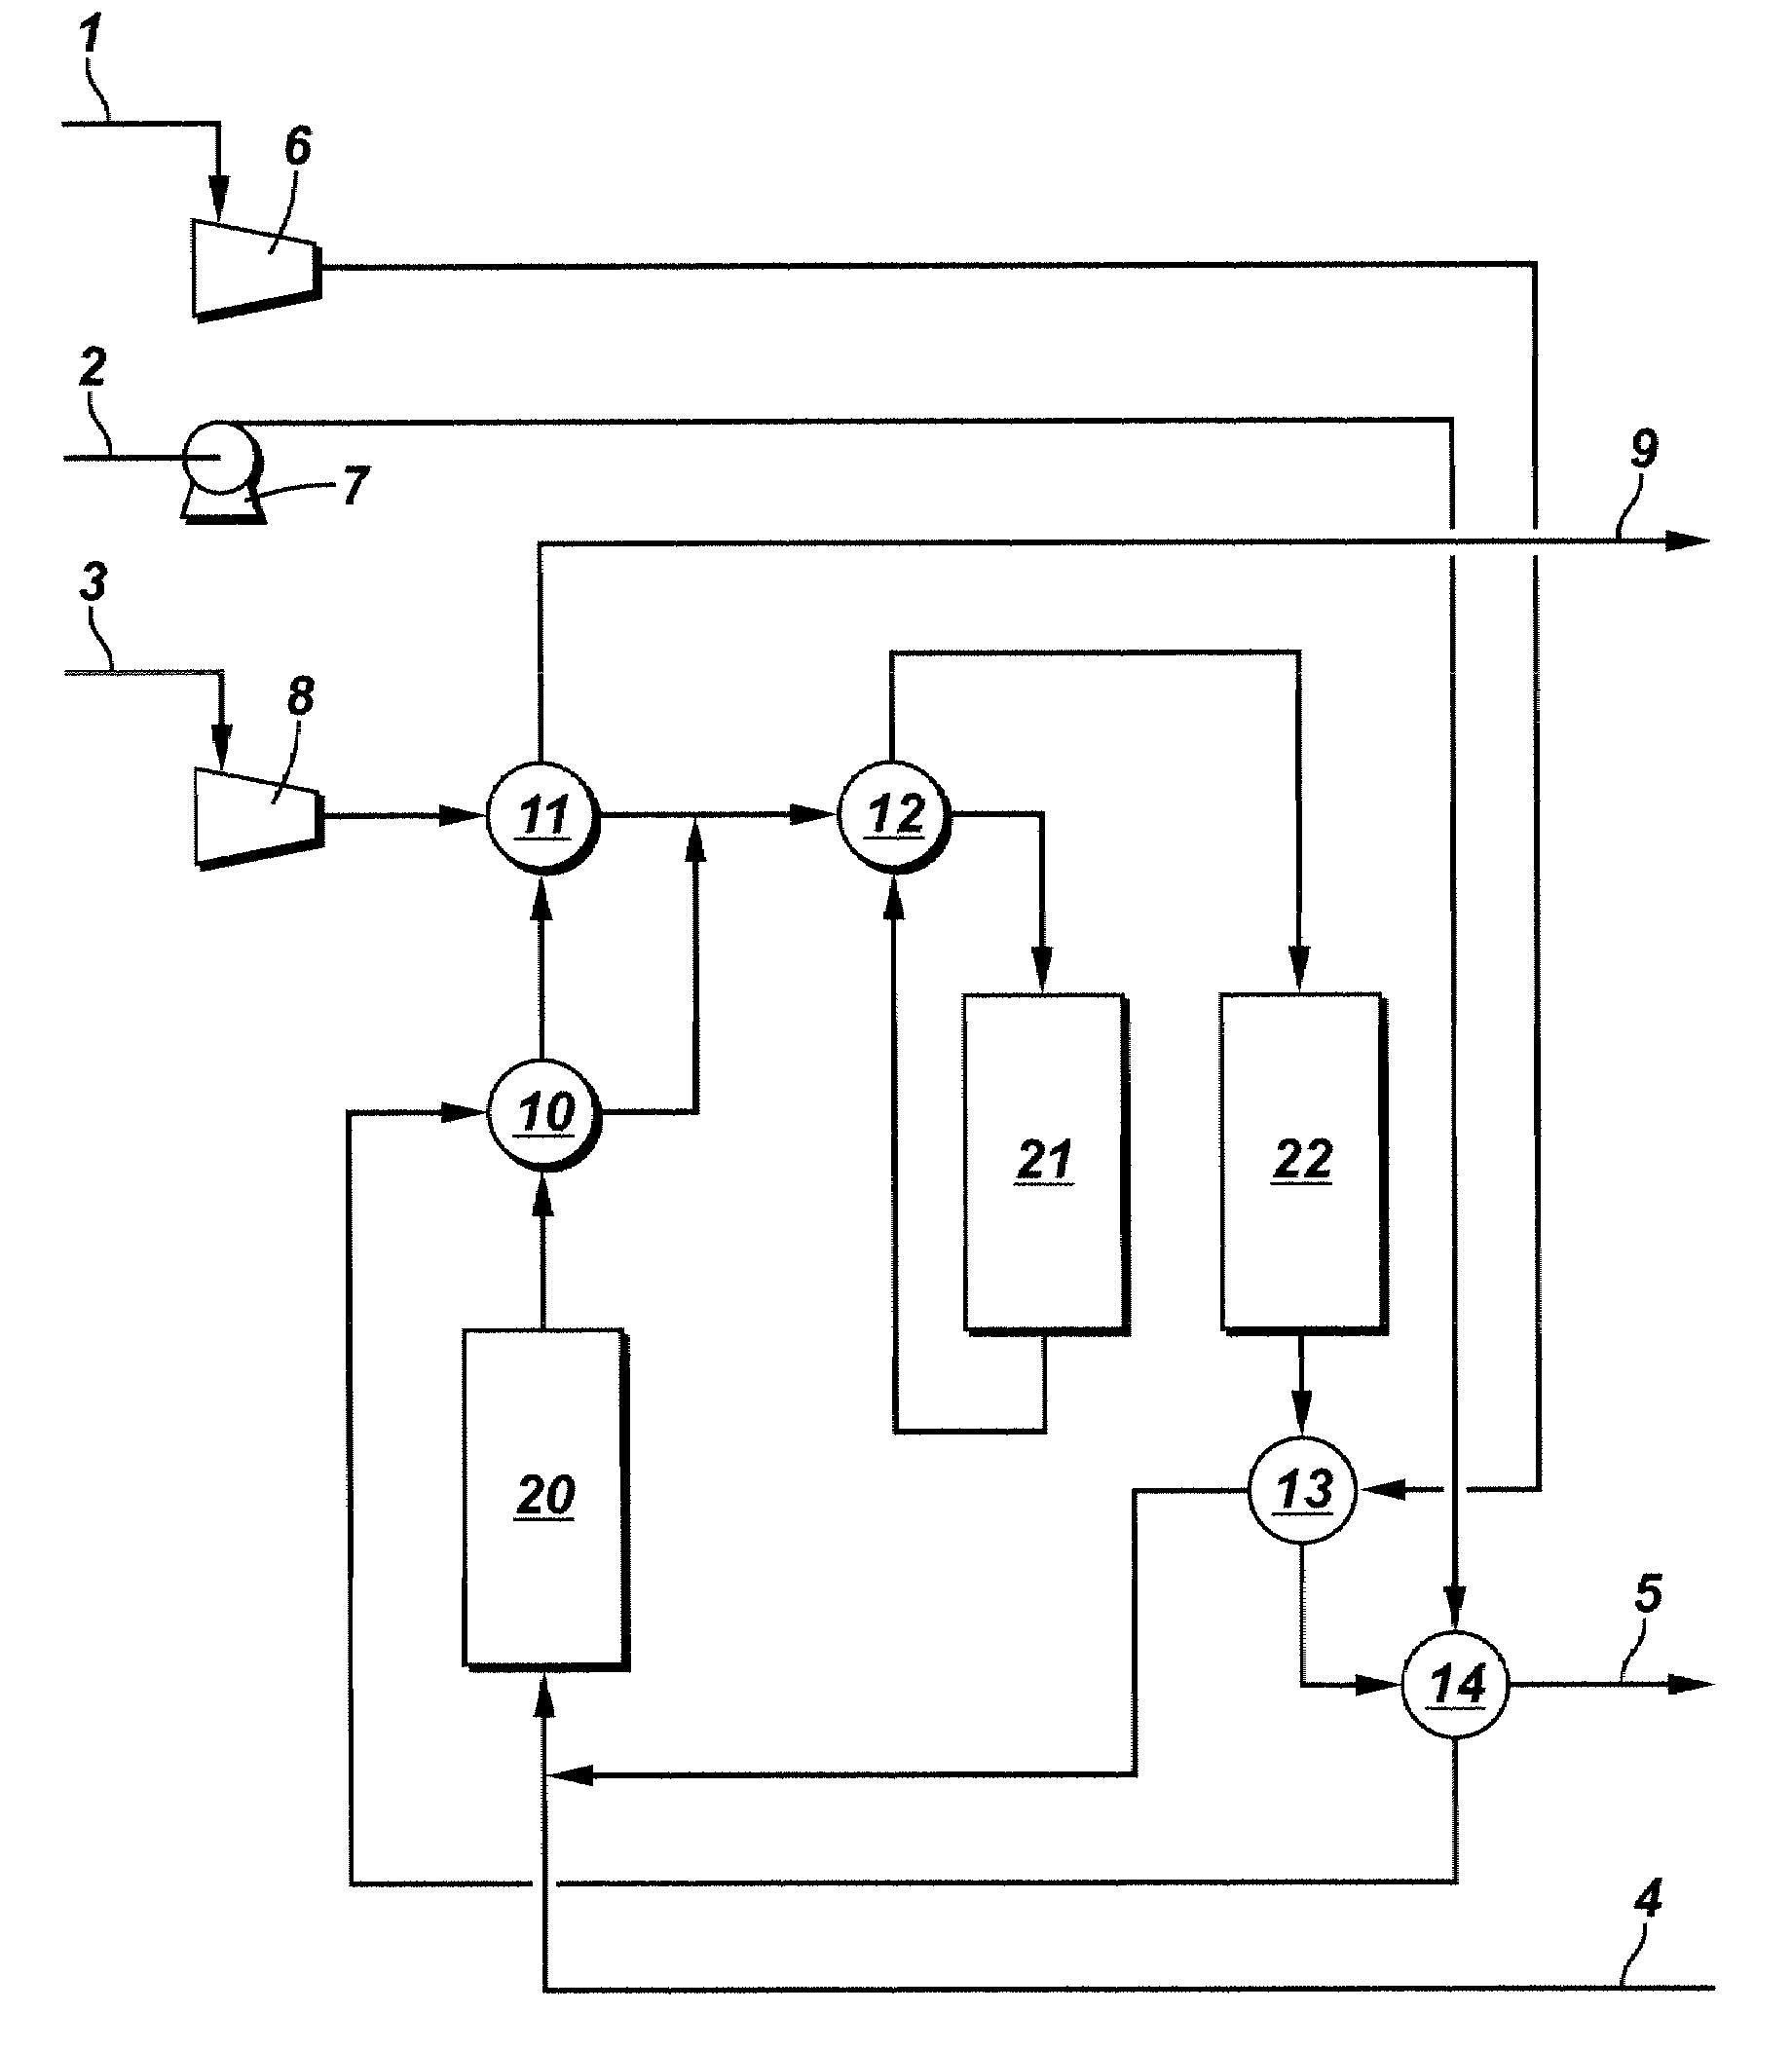 Process and apparatus for synthesis gas and hydrocarbon production